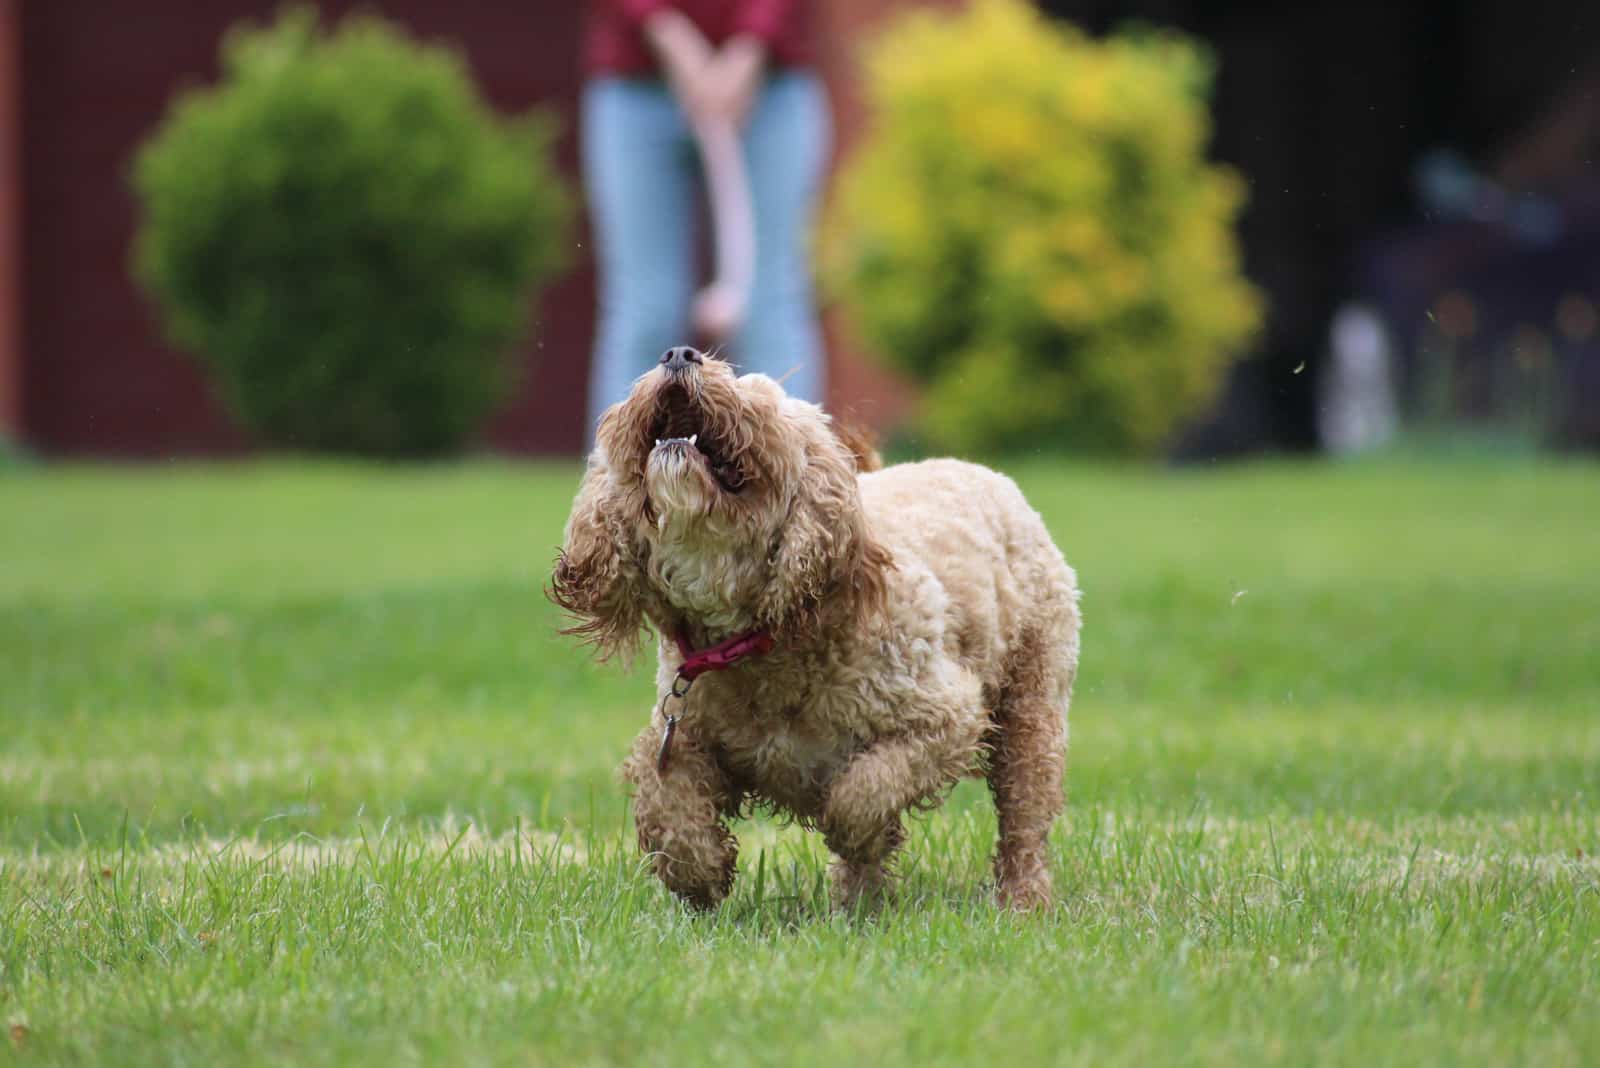 cavapoo breeders in new york in background while dog plays on grass